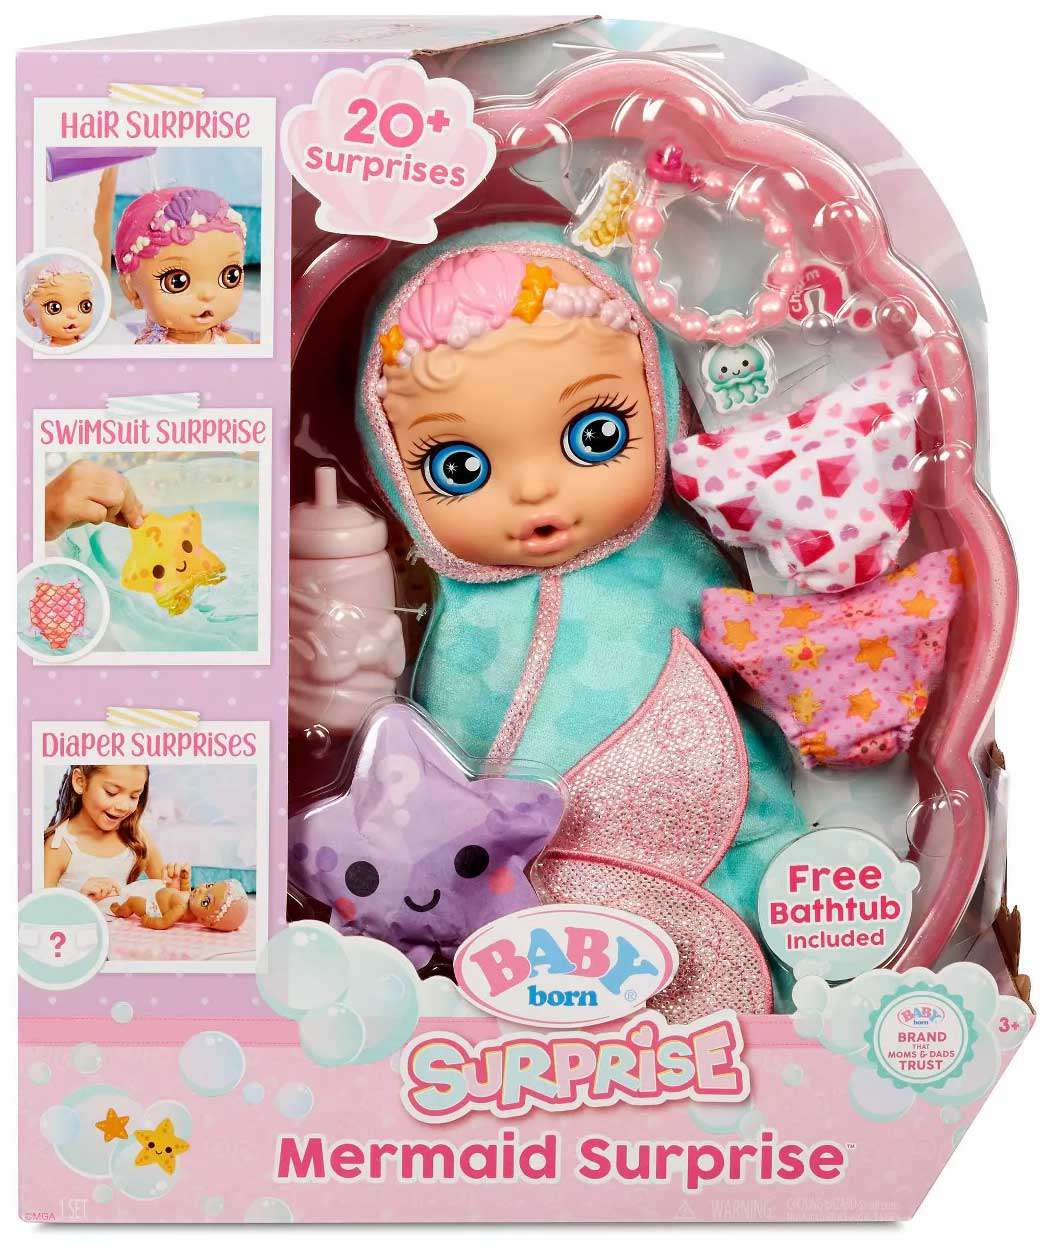 BABY born Surprise Mermaid Surprise – Baby Doll with Teal Towel and 20+ Surprises - image 1 of 6